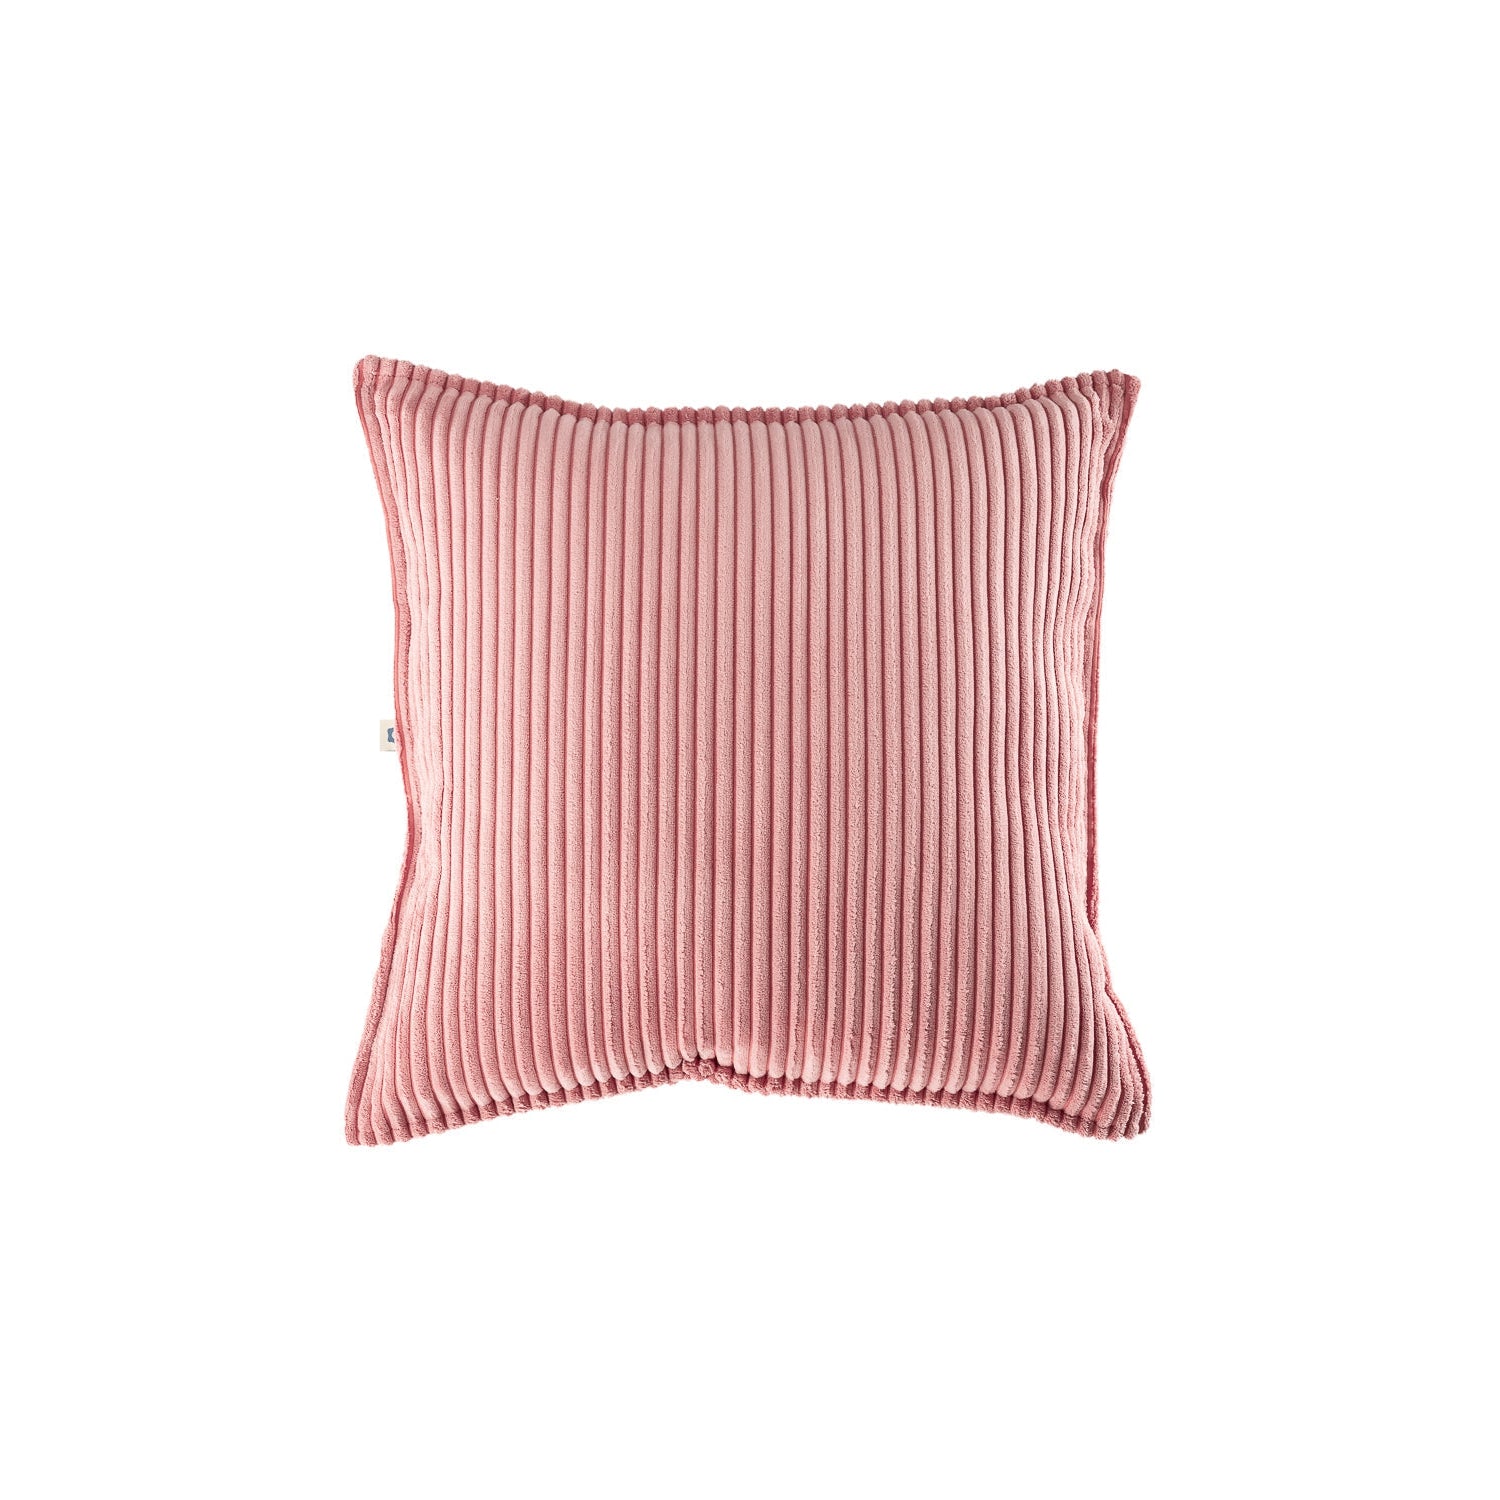 Wigiwama Pink Mousse Block Cushion at Rugs by Roo